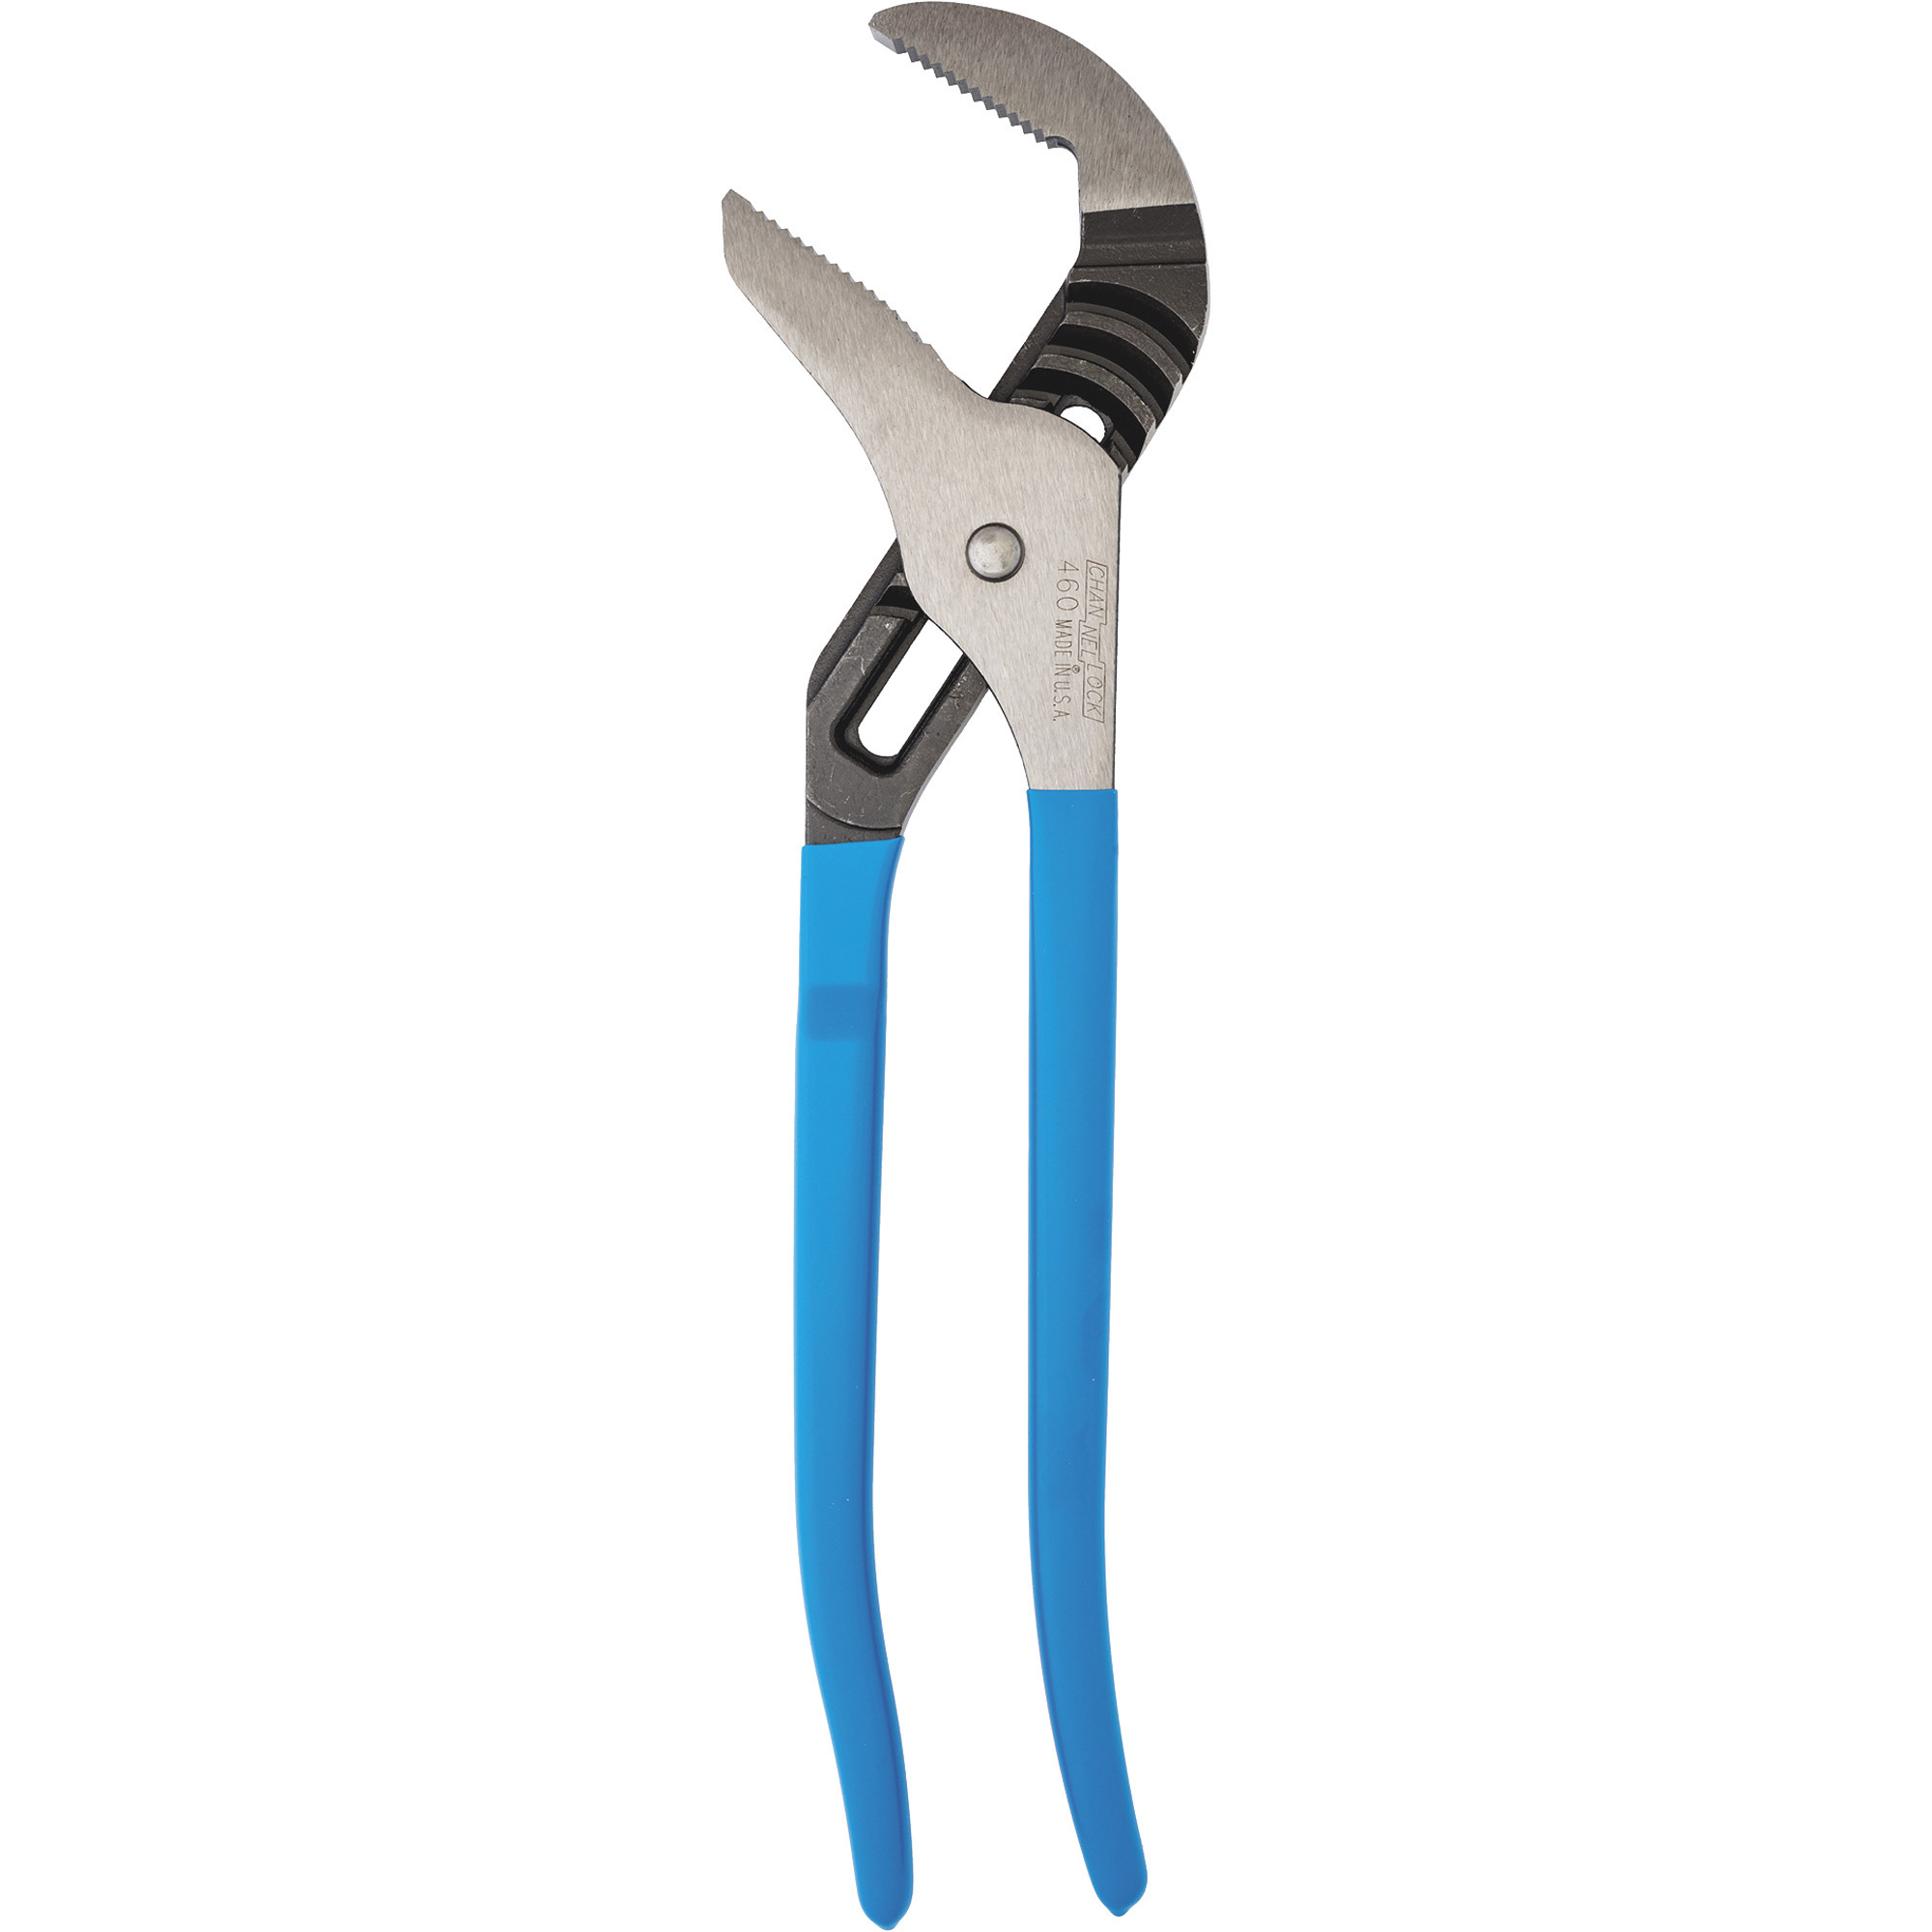 Channellock Tongue and Groove Pliers â 16Inch Length, Model 460